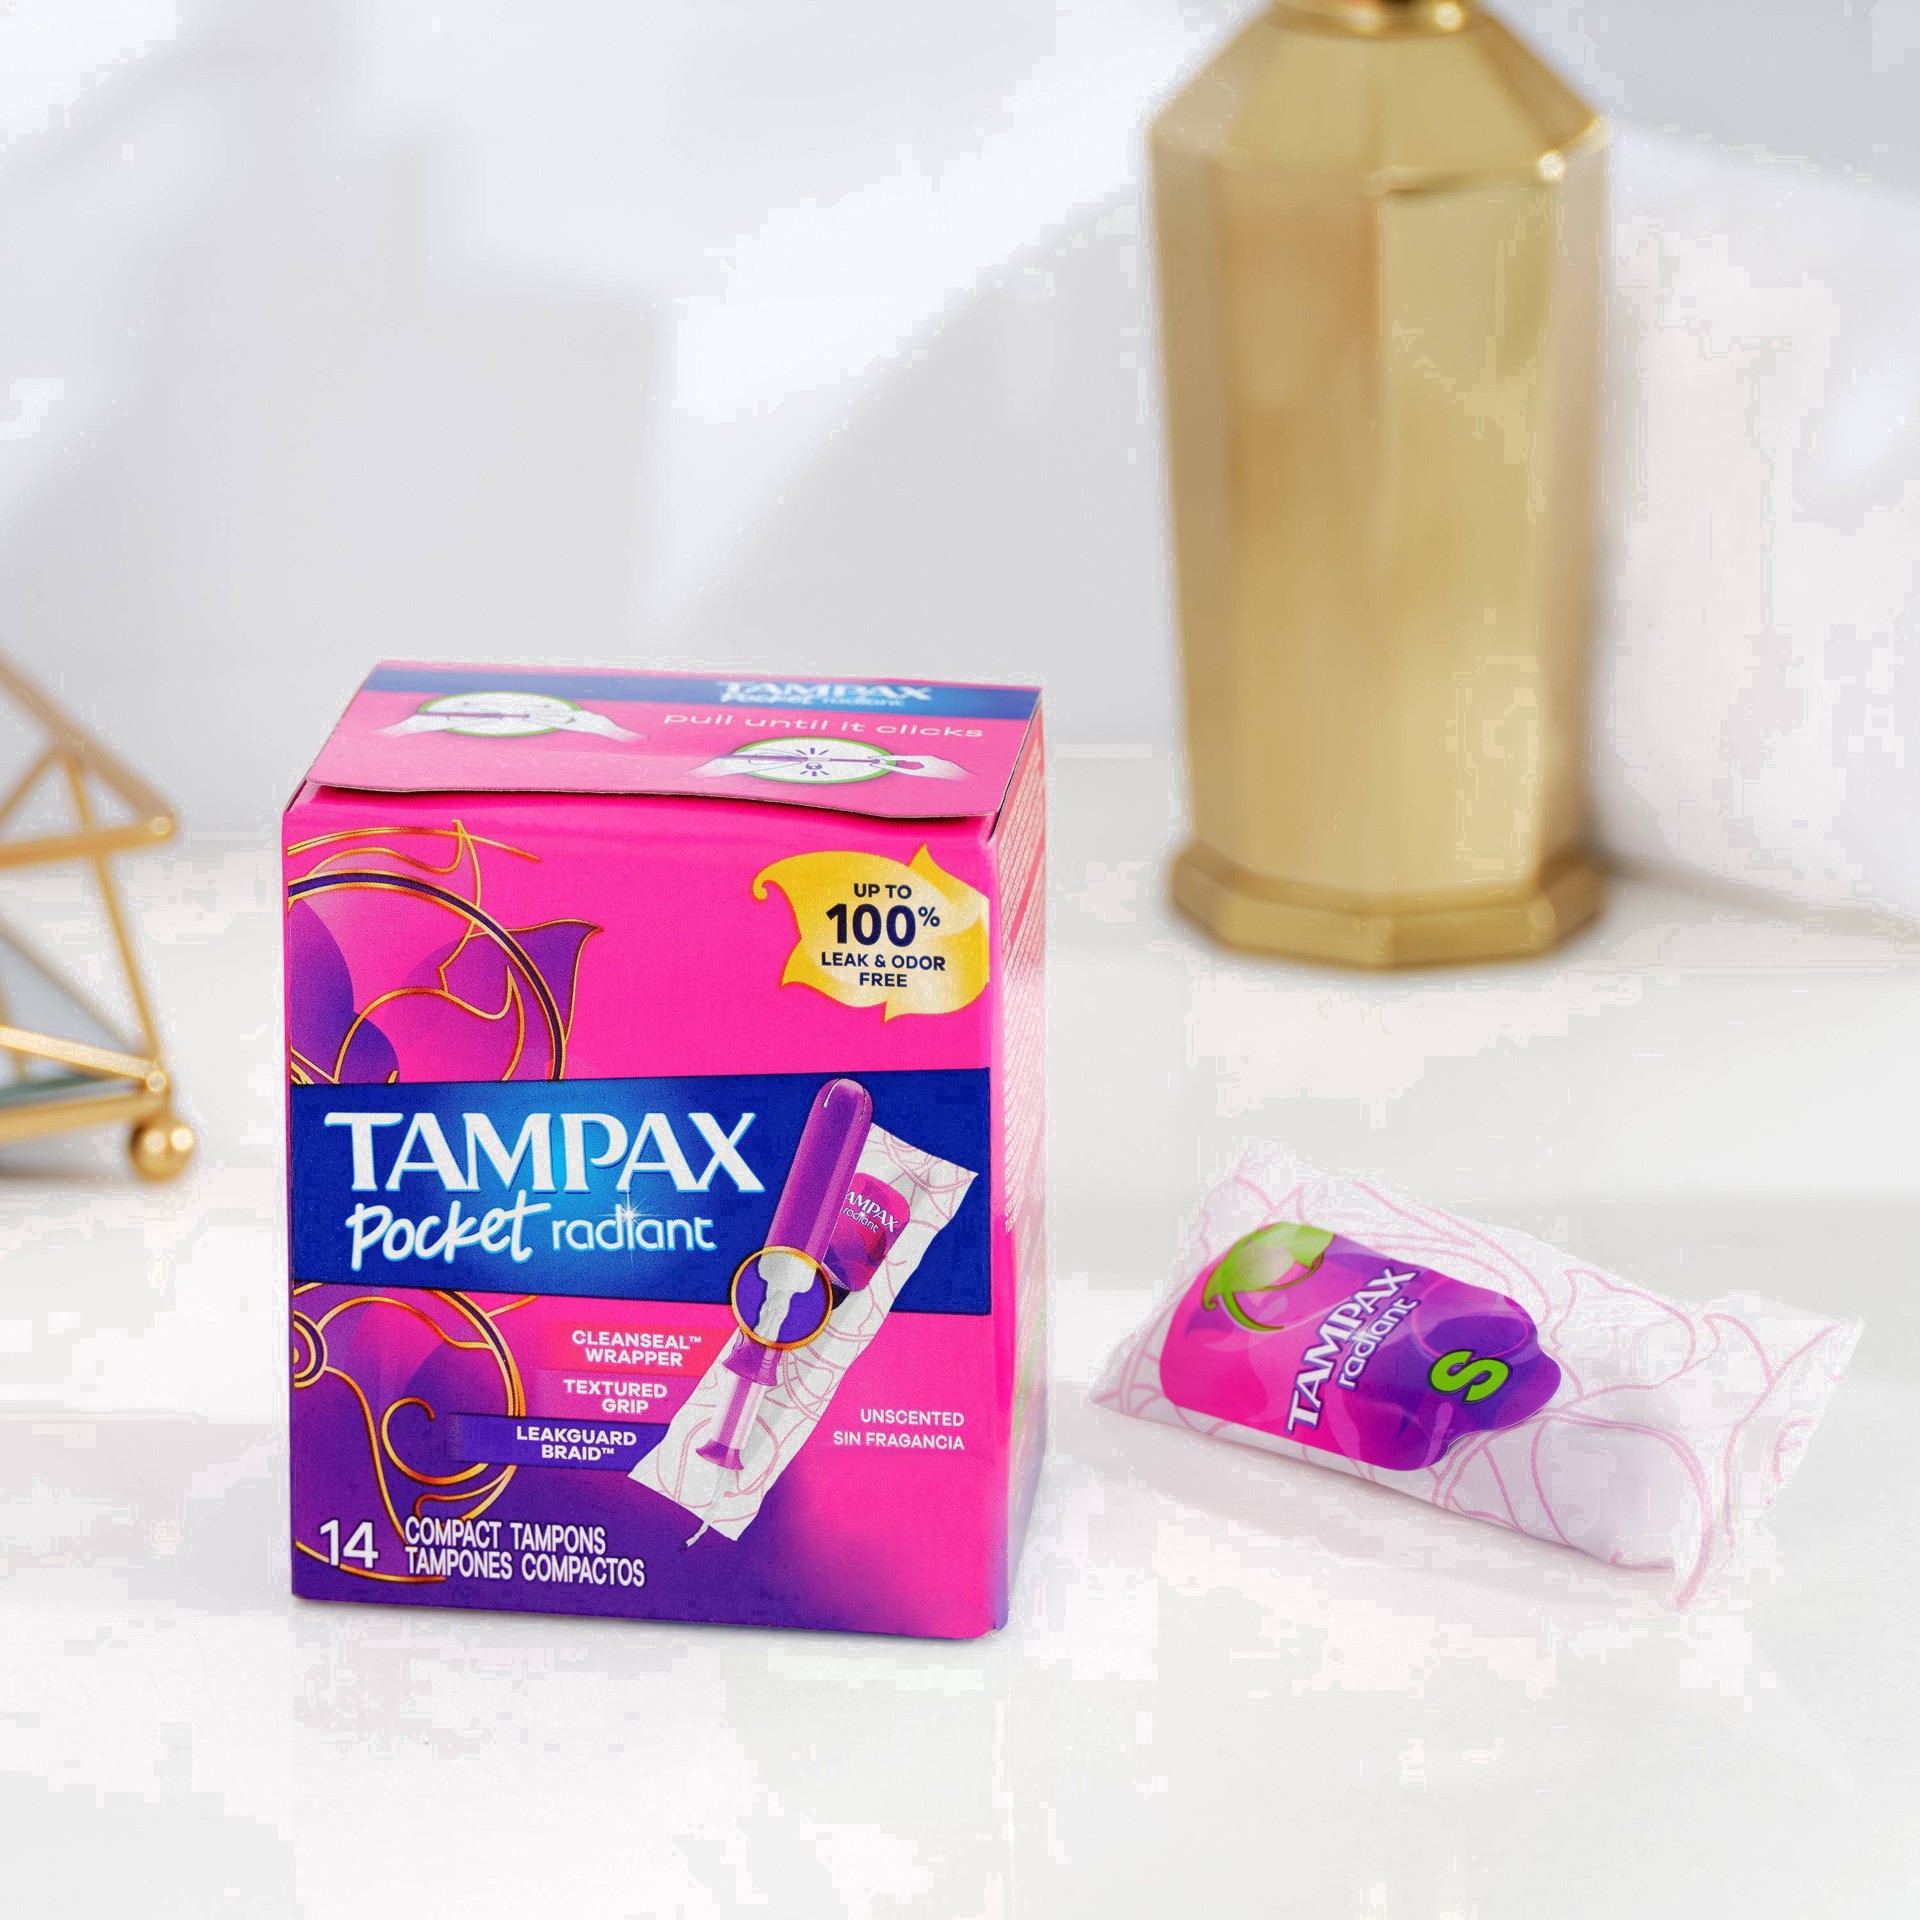 slide 67 of 94, Tampax Pocket Radiant Compact Plastic Tampons, With LeakGuard Braid, Super Absorbency, Unscented, 28 Count, 28 ct